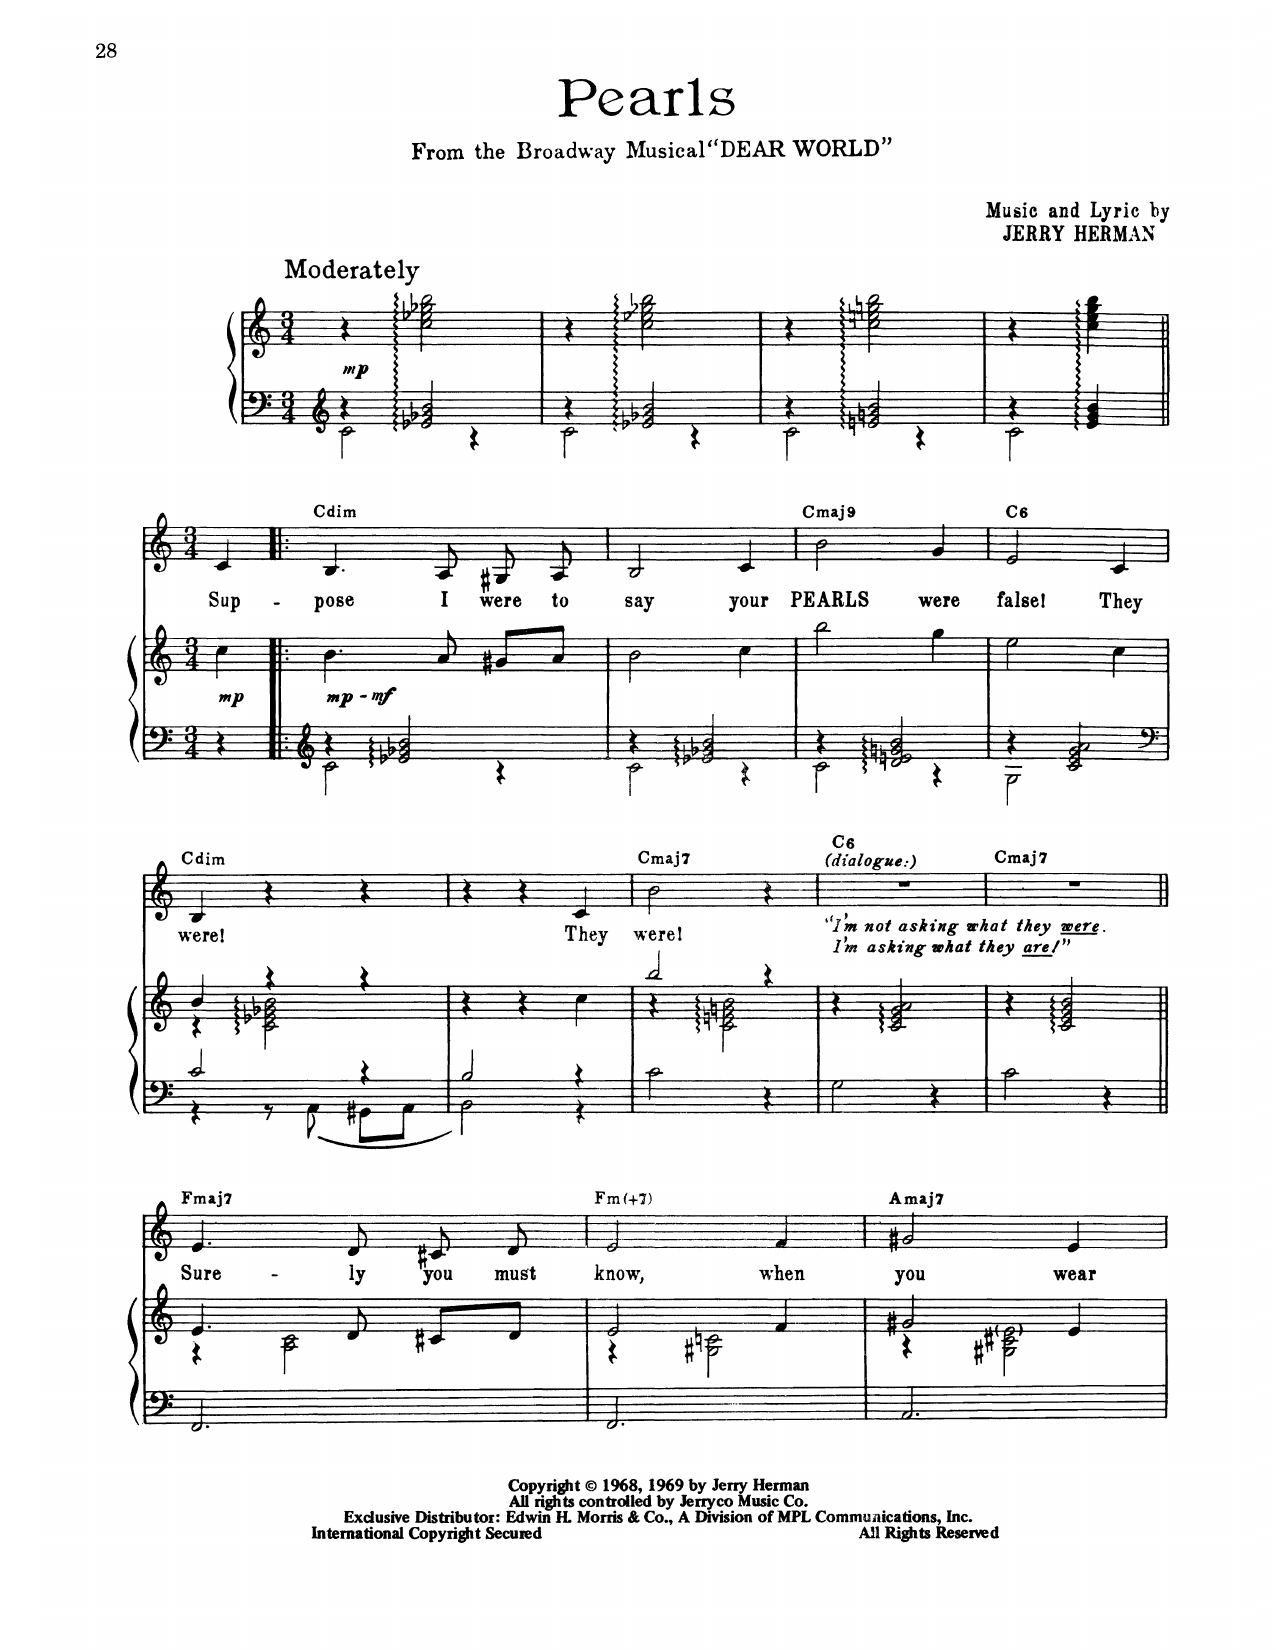 Jerry Herman The Pearls (from Dear World) sheet music notes printable PDF score